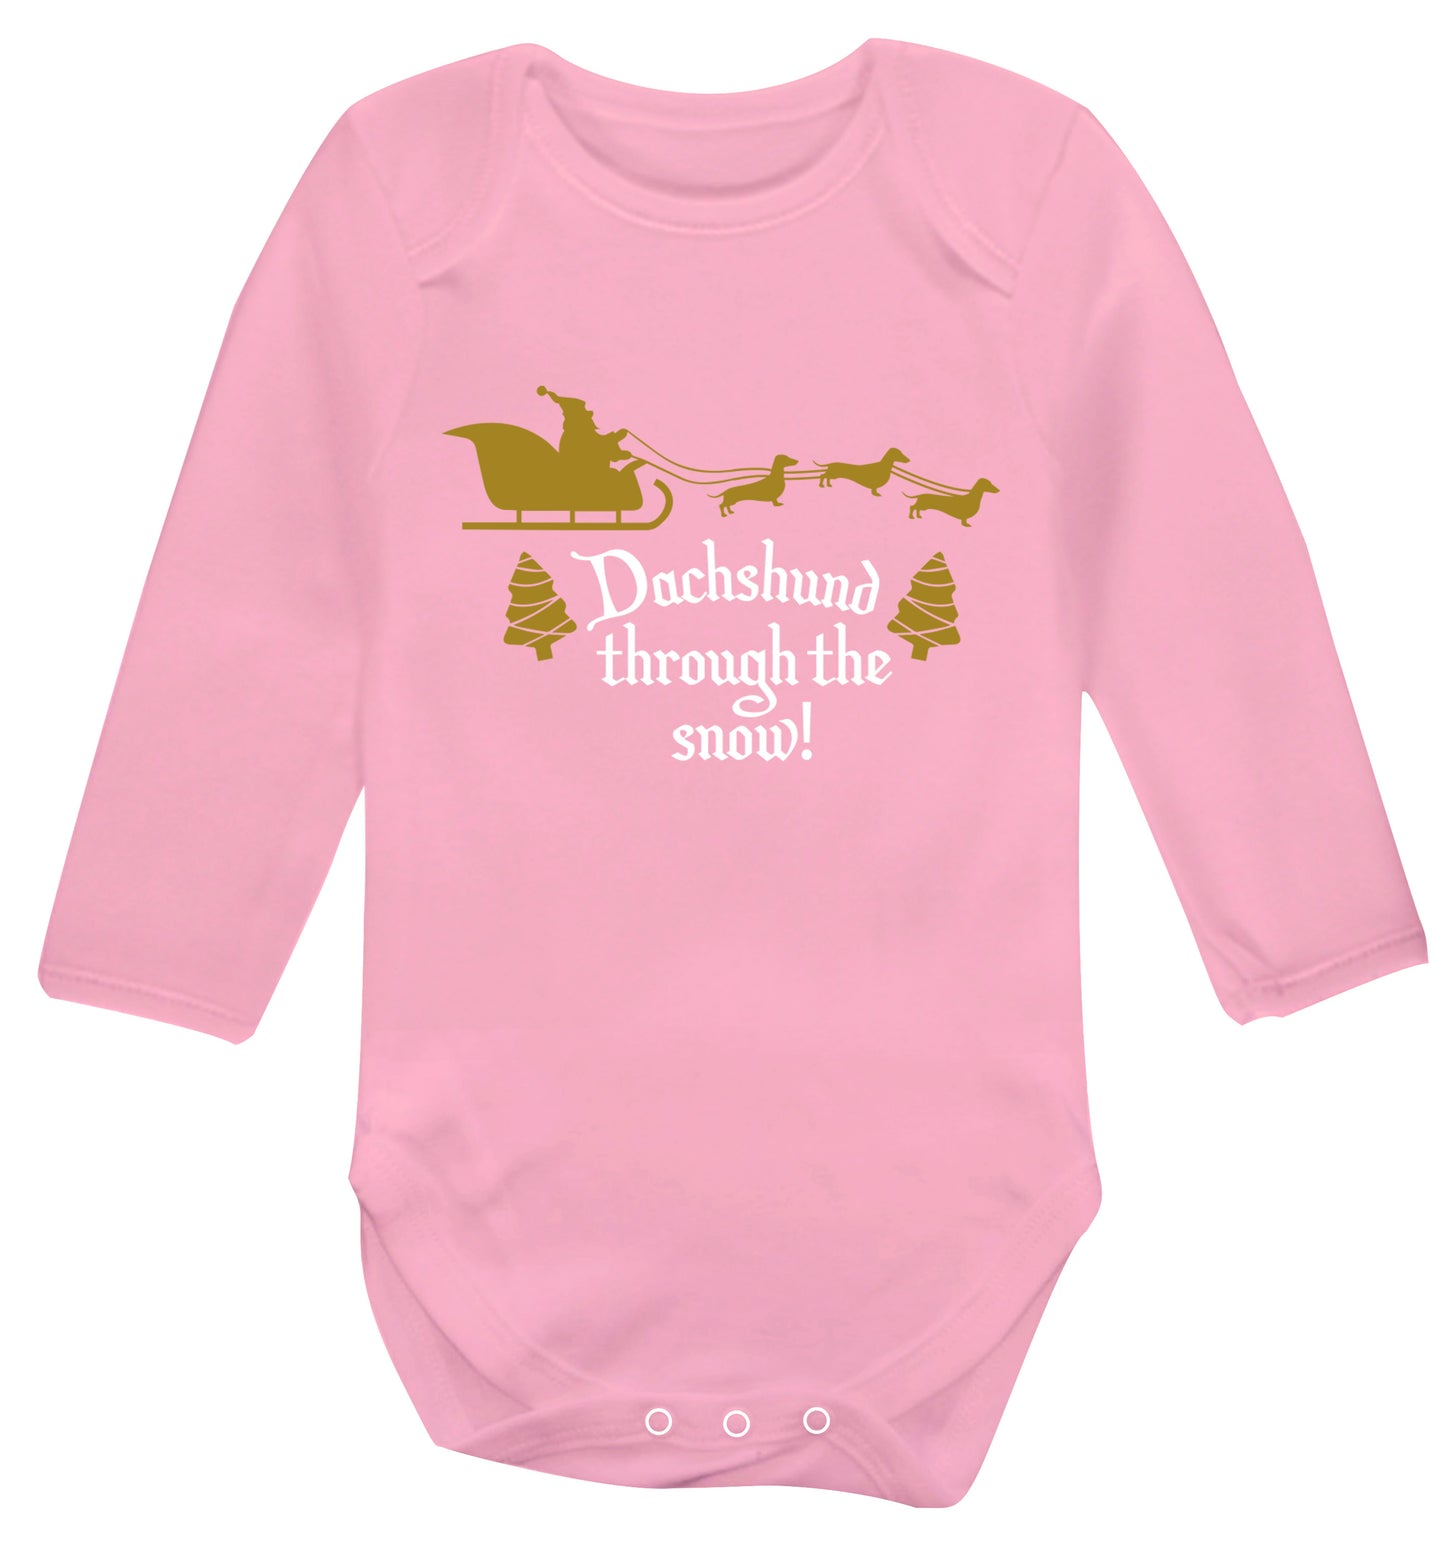 Dachshund through the snow Baby Vest long sleeved pale pink 6-12 months